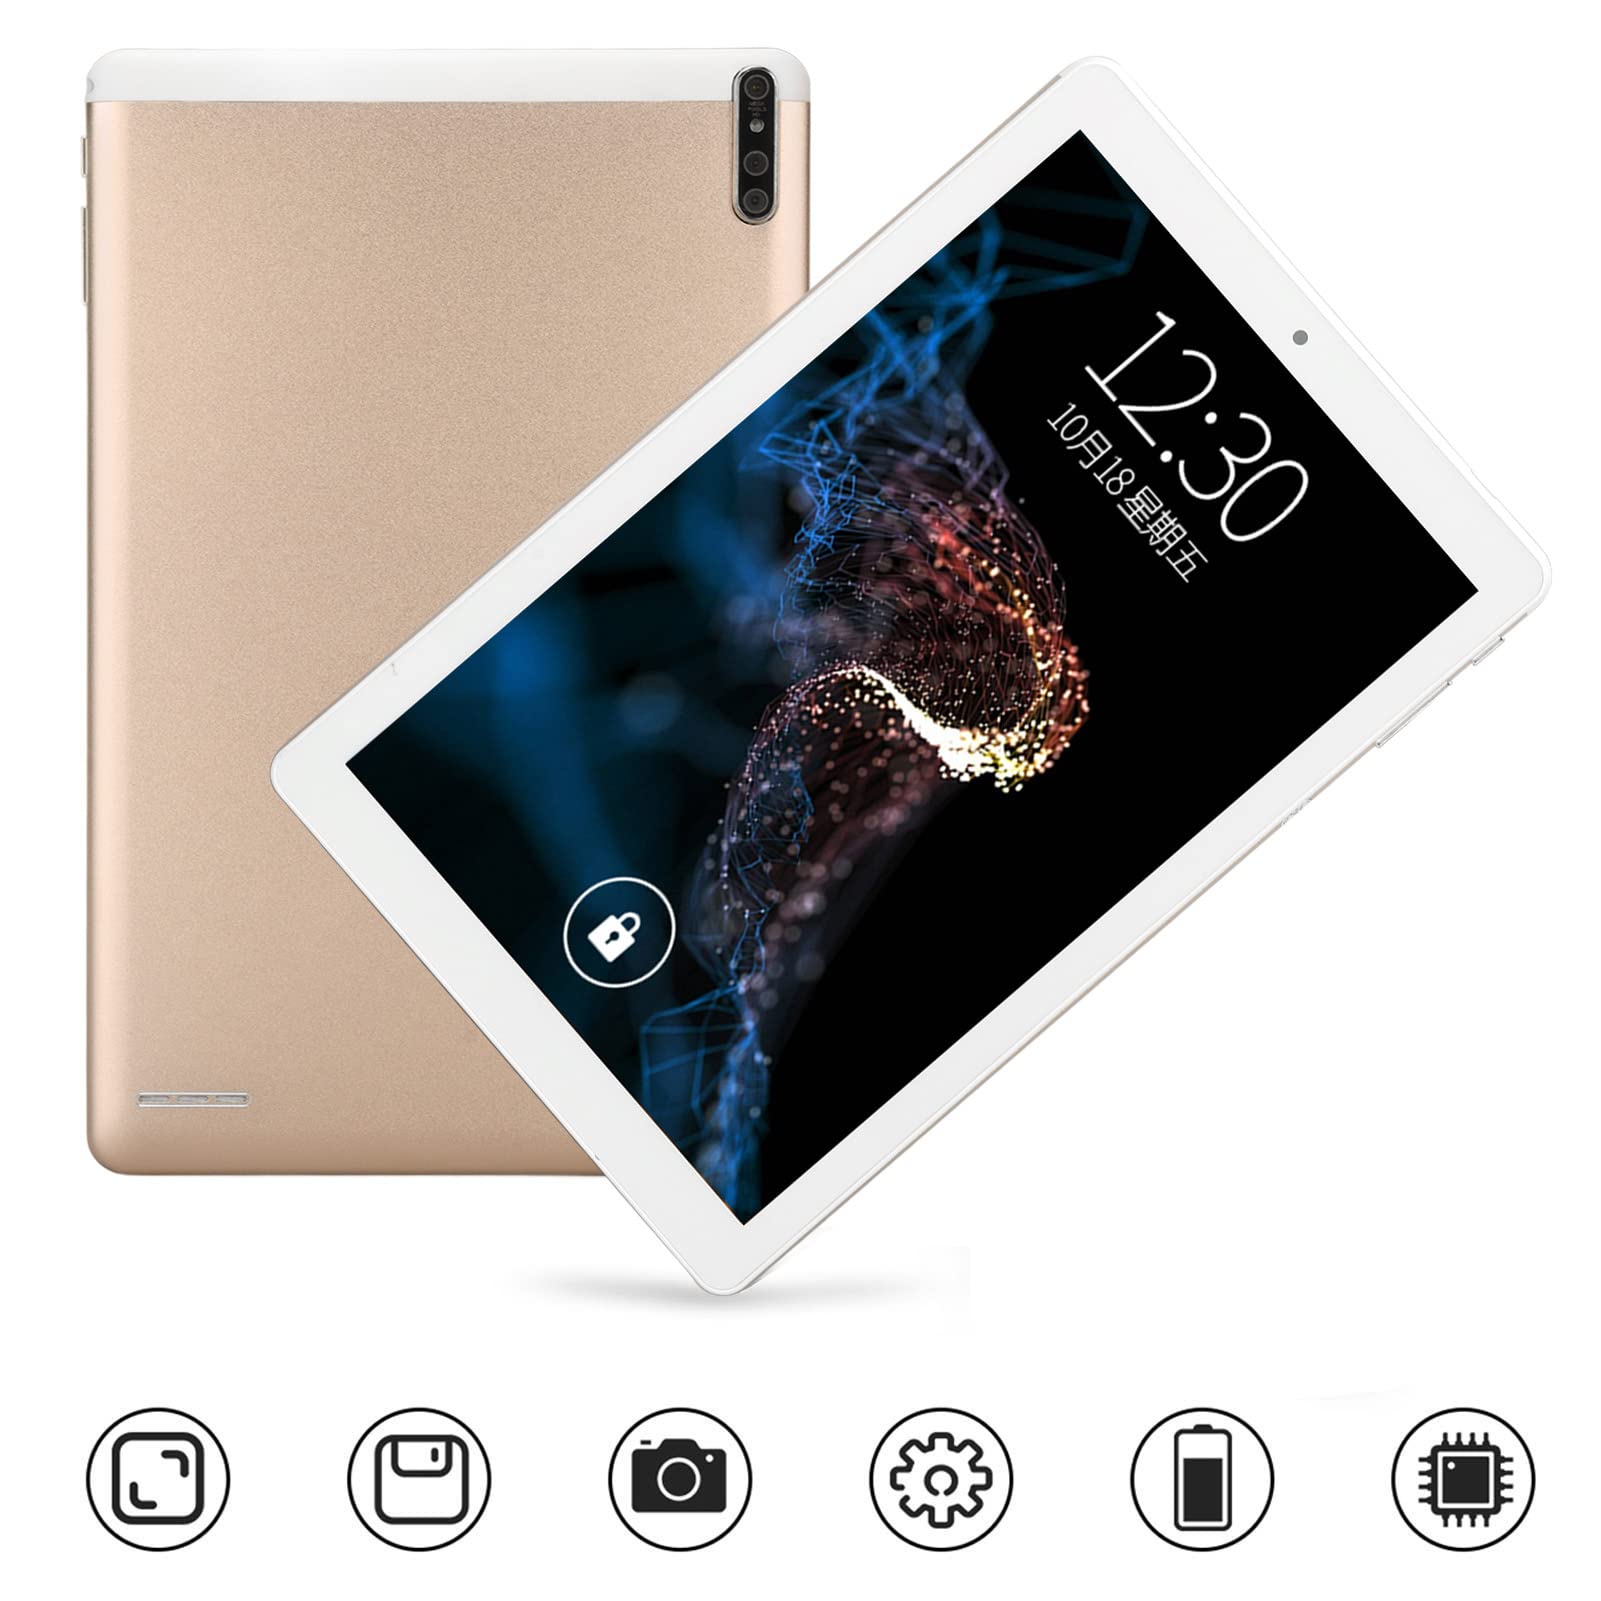 Sorandy 10.1 Inch Tablet Gold 1960x1080 IPS HD Display, Ultra Slim Educational Tablet, 5G WiFi Dual Band Tablet, 6GB RAM 128GB ROM, 5MP and 13MP Octa Core Processor, Long Lasting Battery